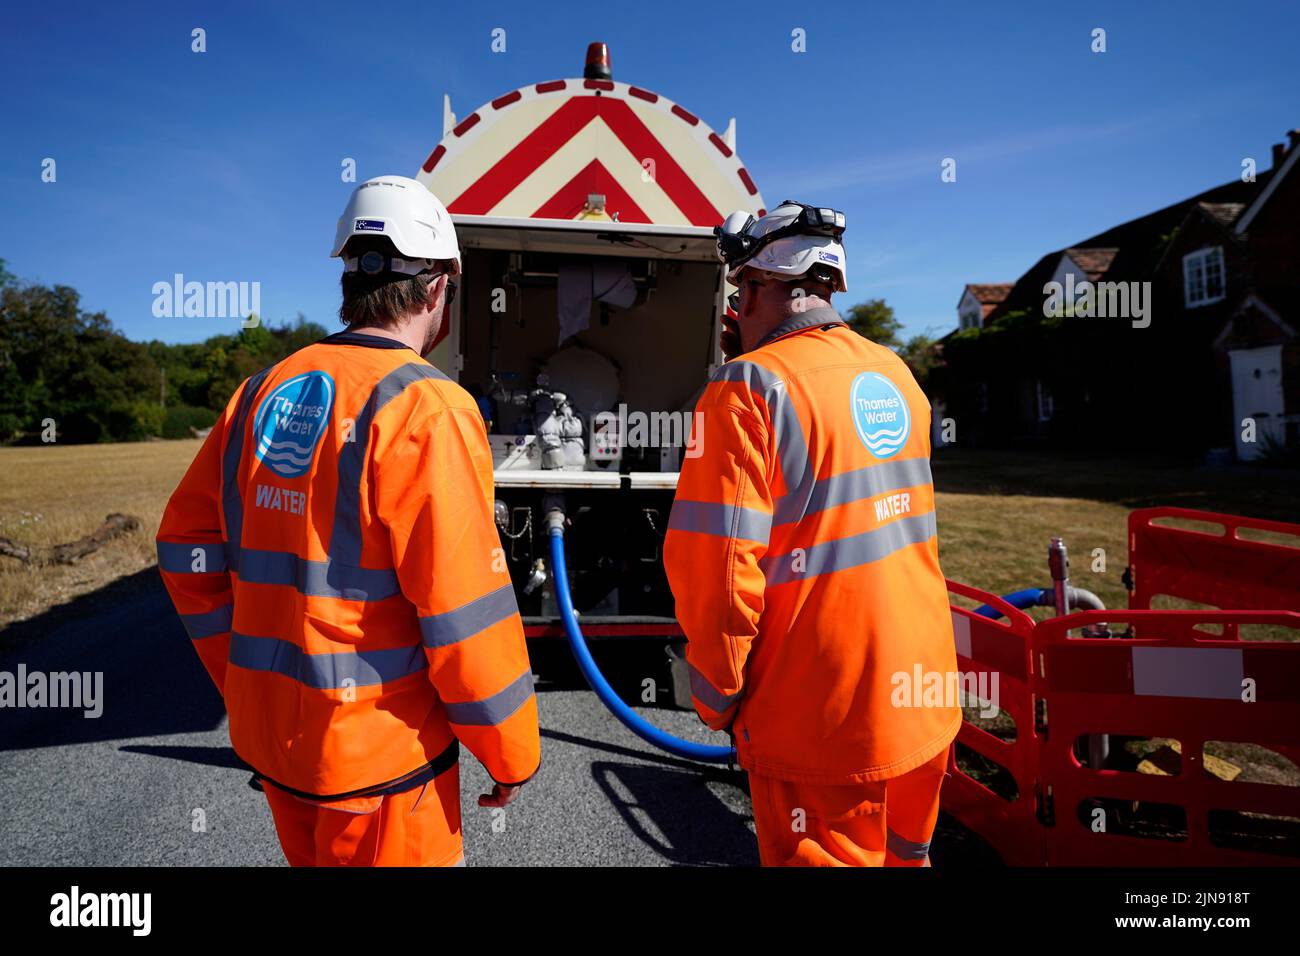 A worker from Thames Water delivering a temporary water supply from a tanker to the village of Northend in Oxfordshire, where the water company is pumping water into the supply network following a technical issue at Stokenchurch Reservoir. TPicture date: Wednesday August 10, 2022. Stock Photo